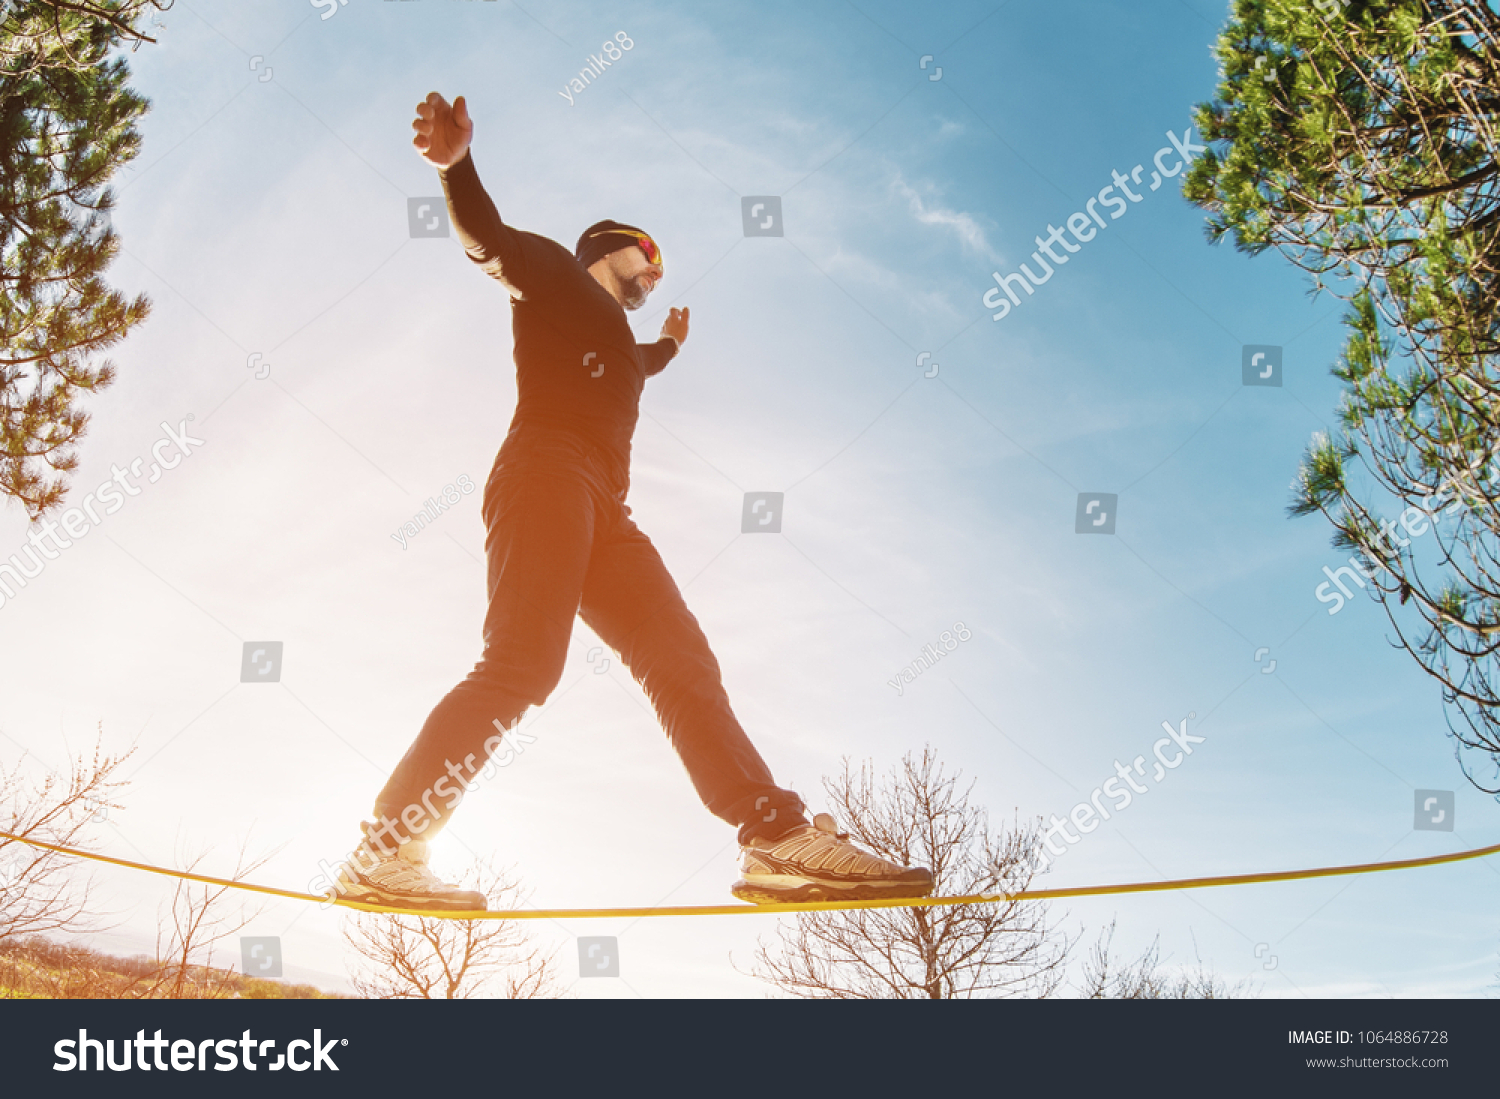 A man, aged with a beard and wearing sunglasses, balances on a slackline in the open air between two trees at sunset #1064886728